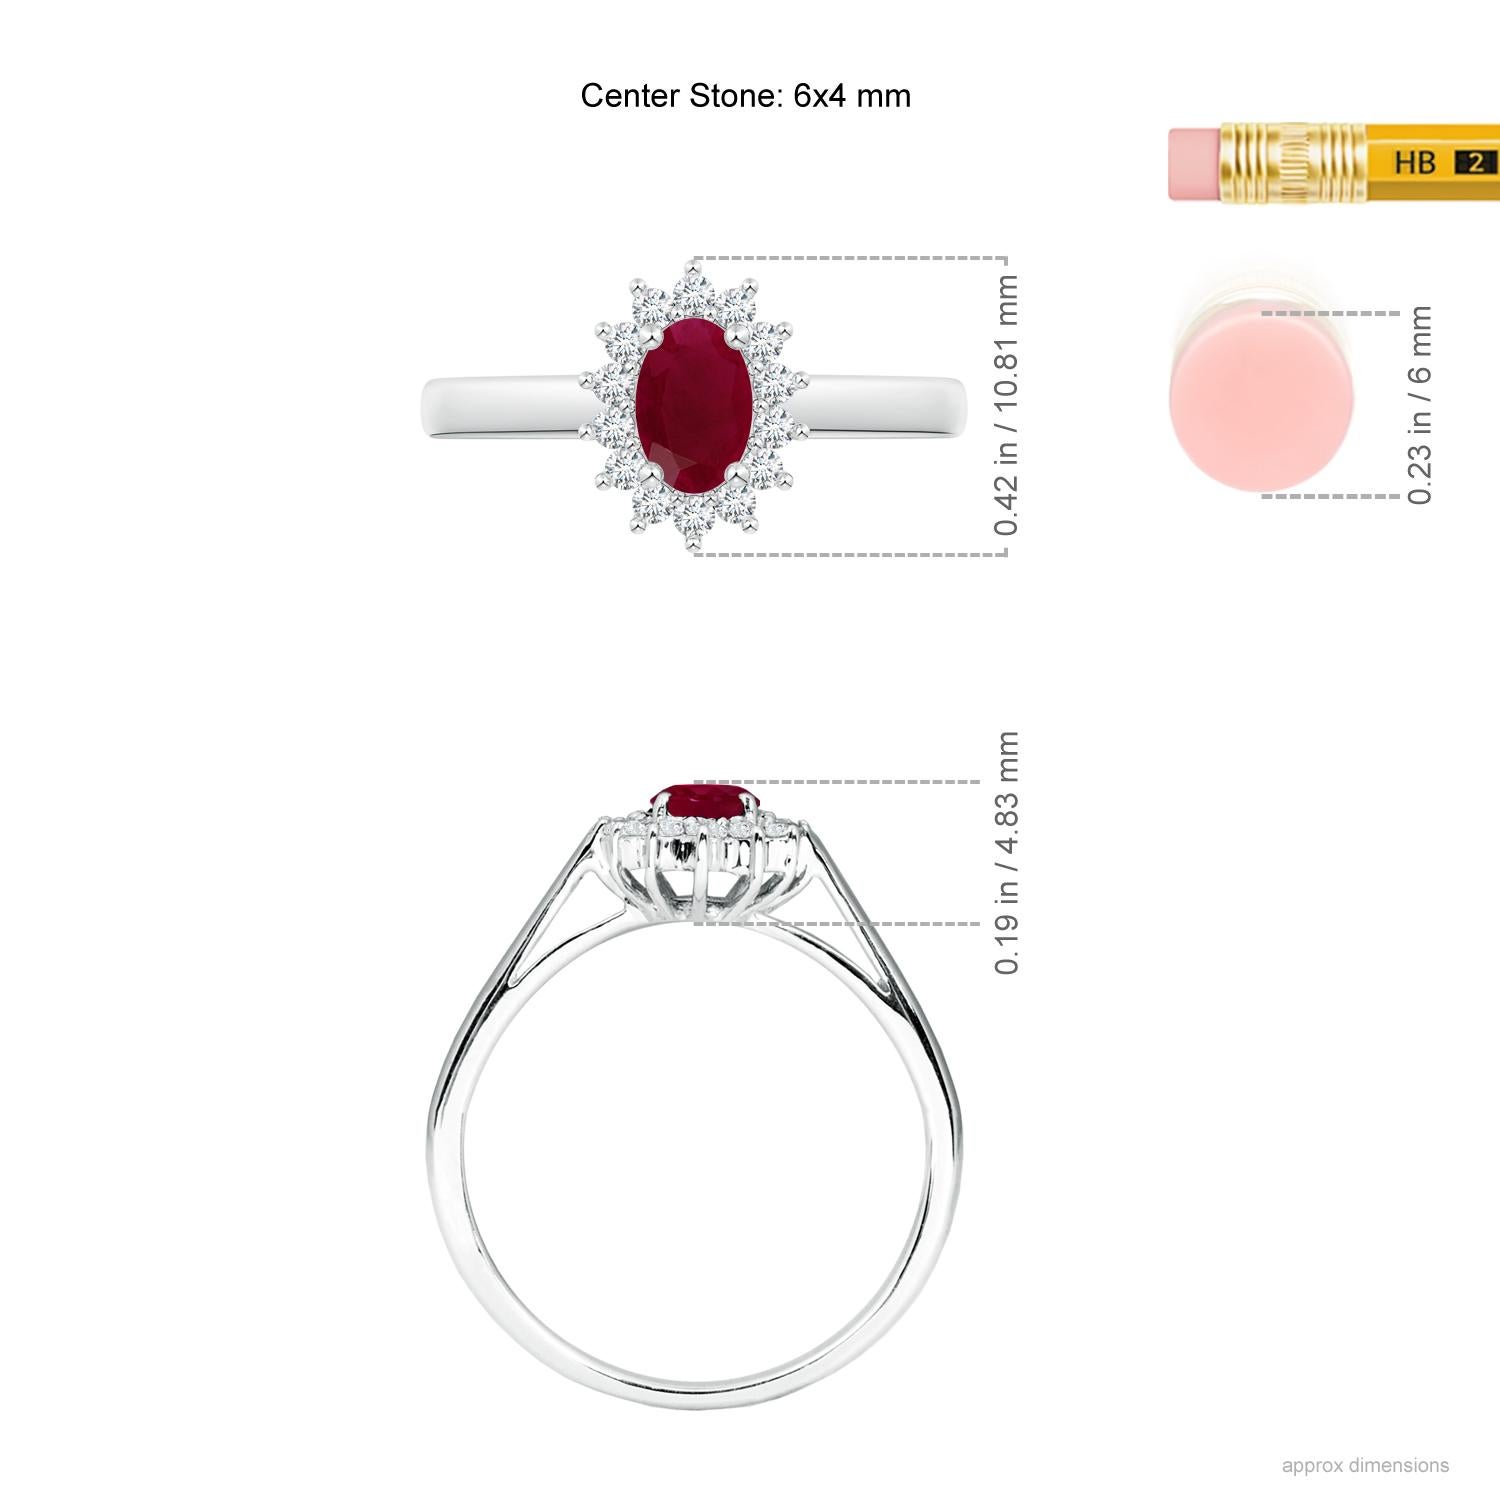 At the core of a scintillating floral halo is a radiant red oval ruby, held in a prong setting. This oval ruby ring is inspired by Princess Diana's beautiful engagement ring. It is crafted in Platinum and bespeaks glamour and elegance.